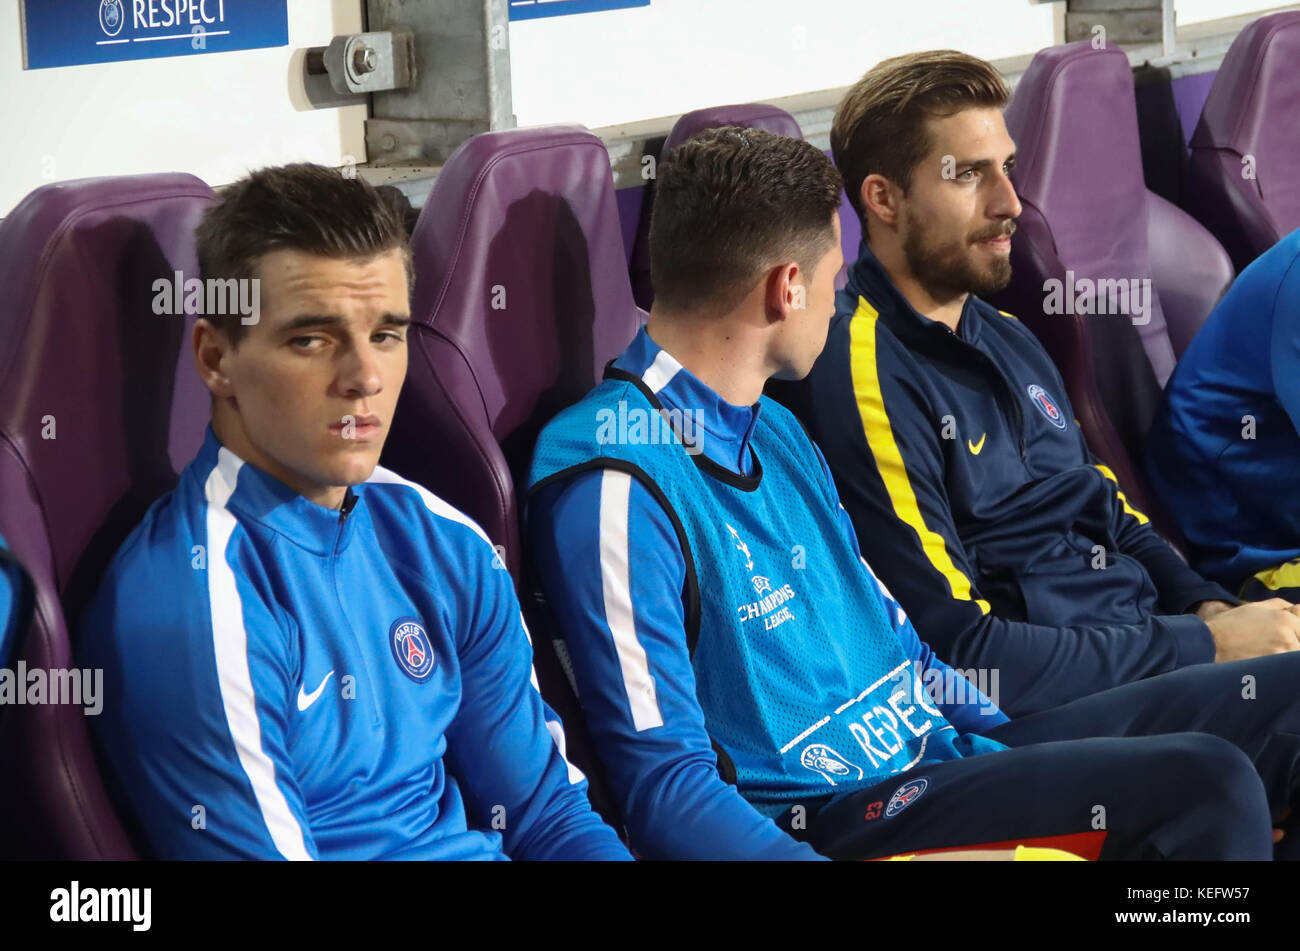 Anderlecht, Belgium. 18 October 2017.Giovani Lo Celso, Julian Draxler and Kevin Tapp (Paris Saint Germain) during the match of Champions League Anderl Stock Photo